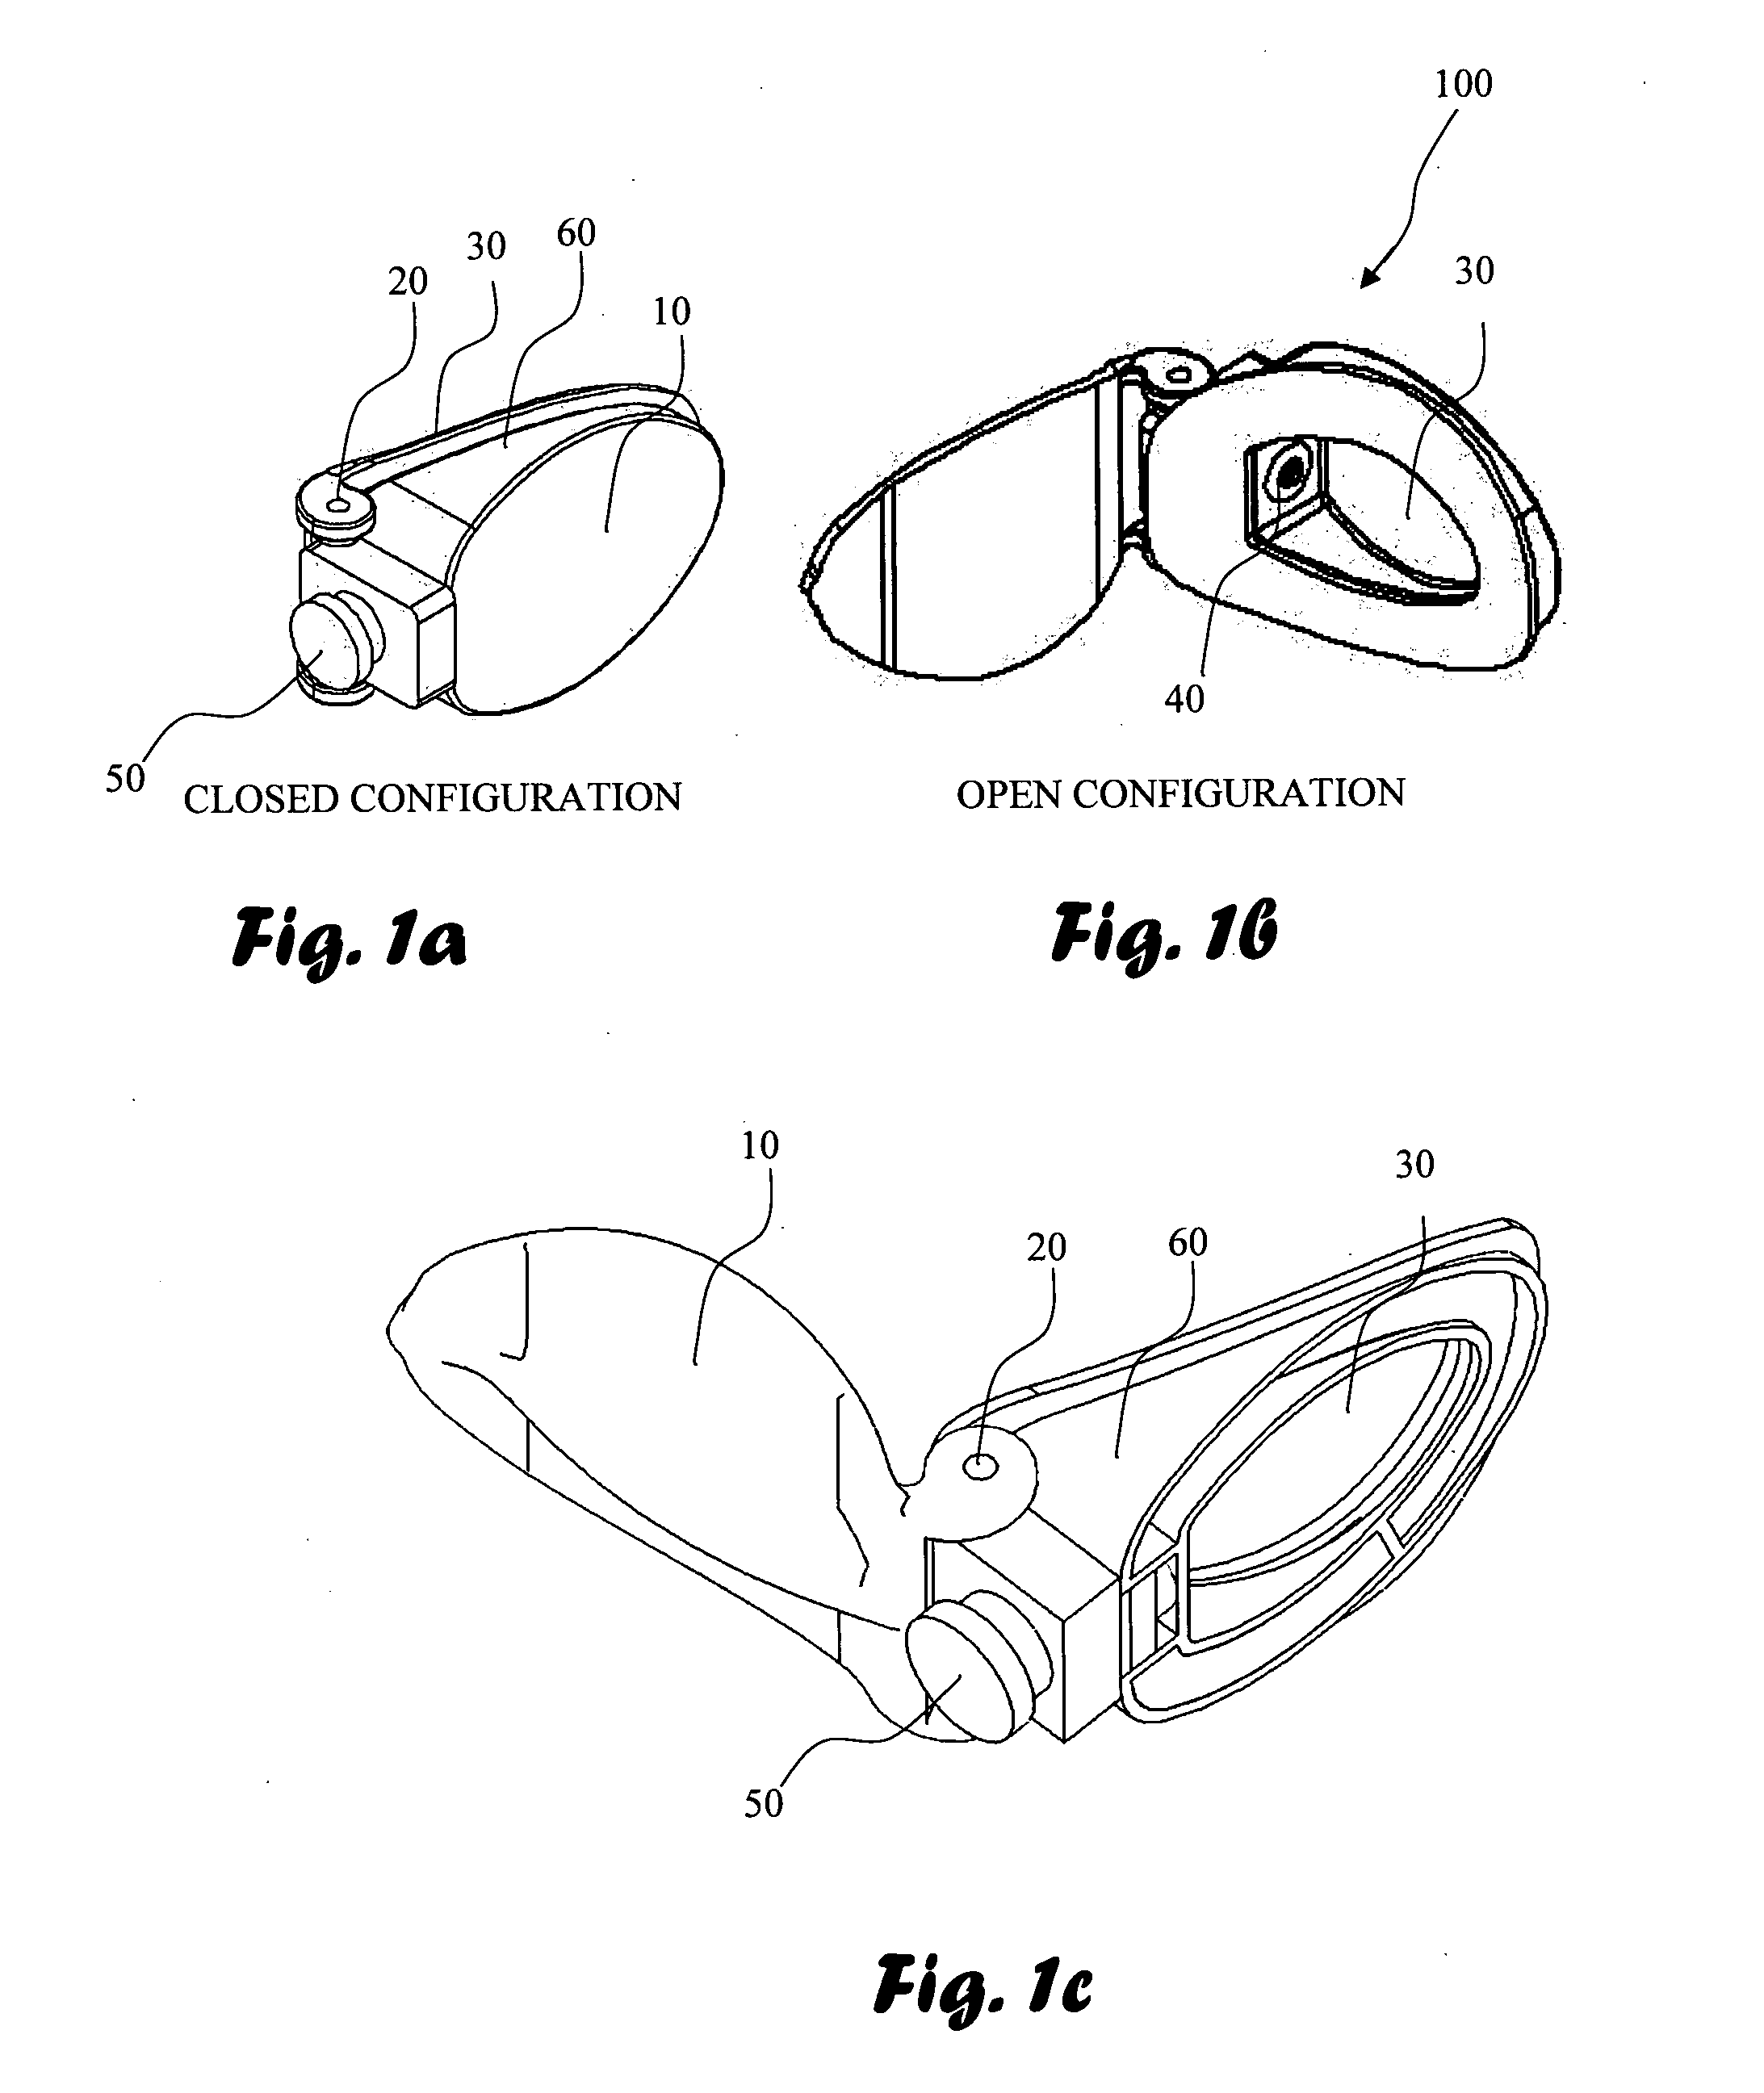 Device for applying an ophthalmic medicament mist